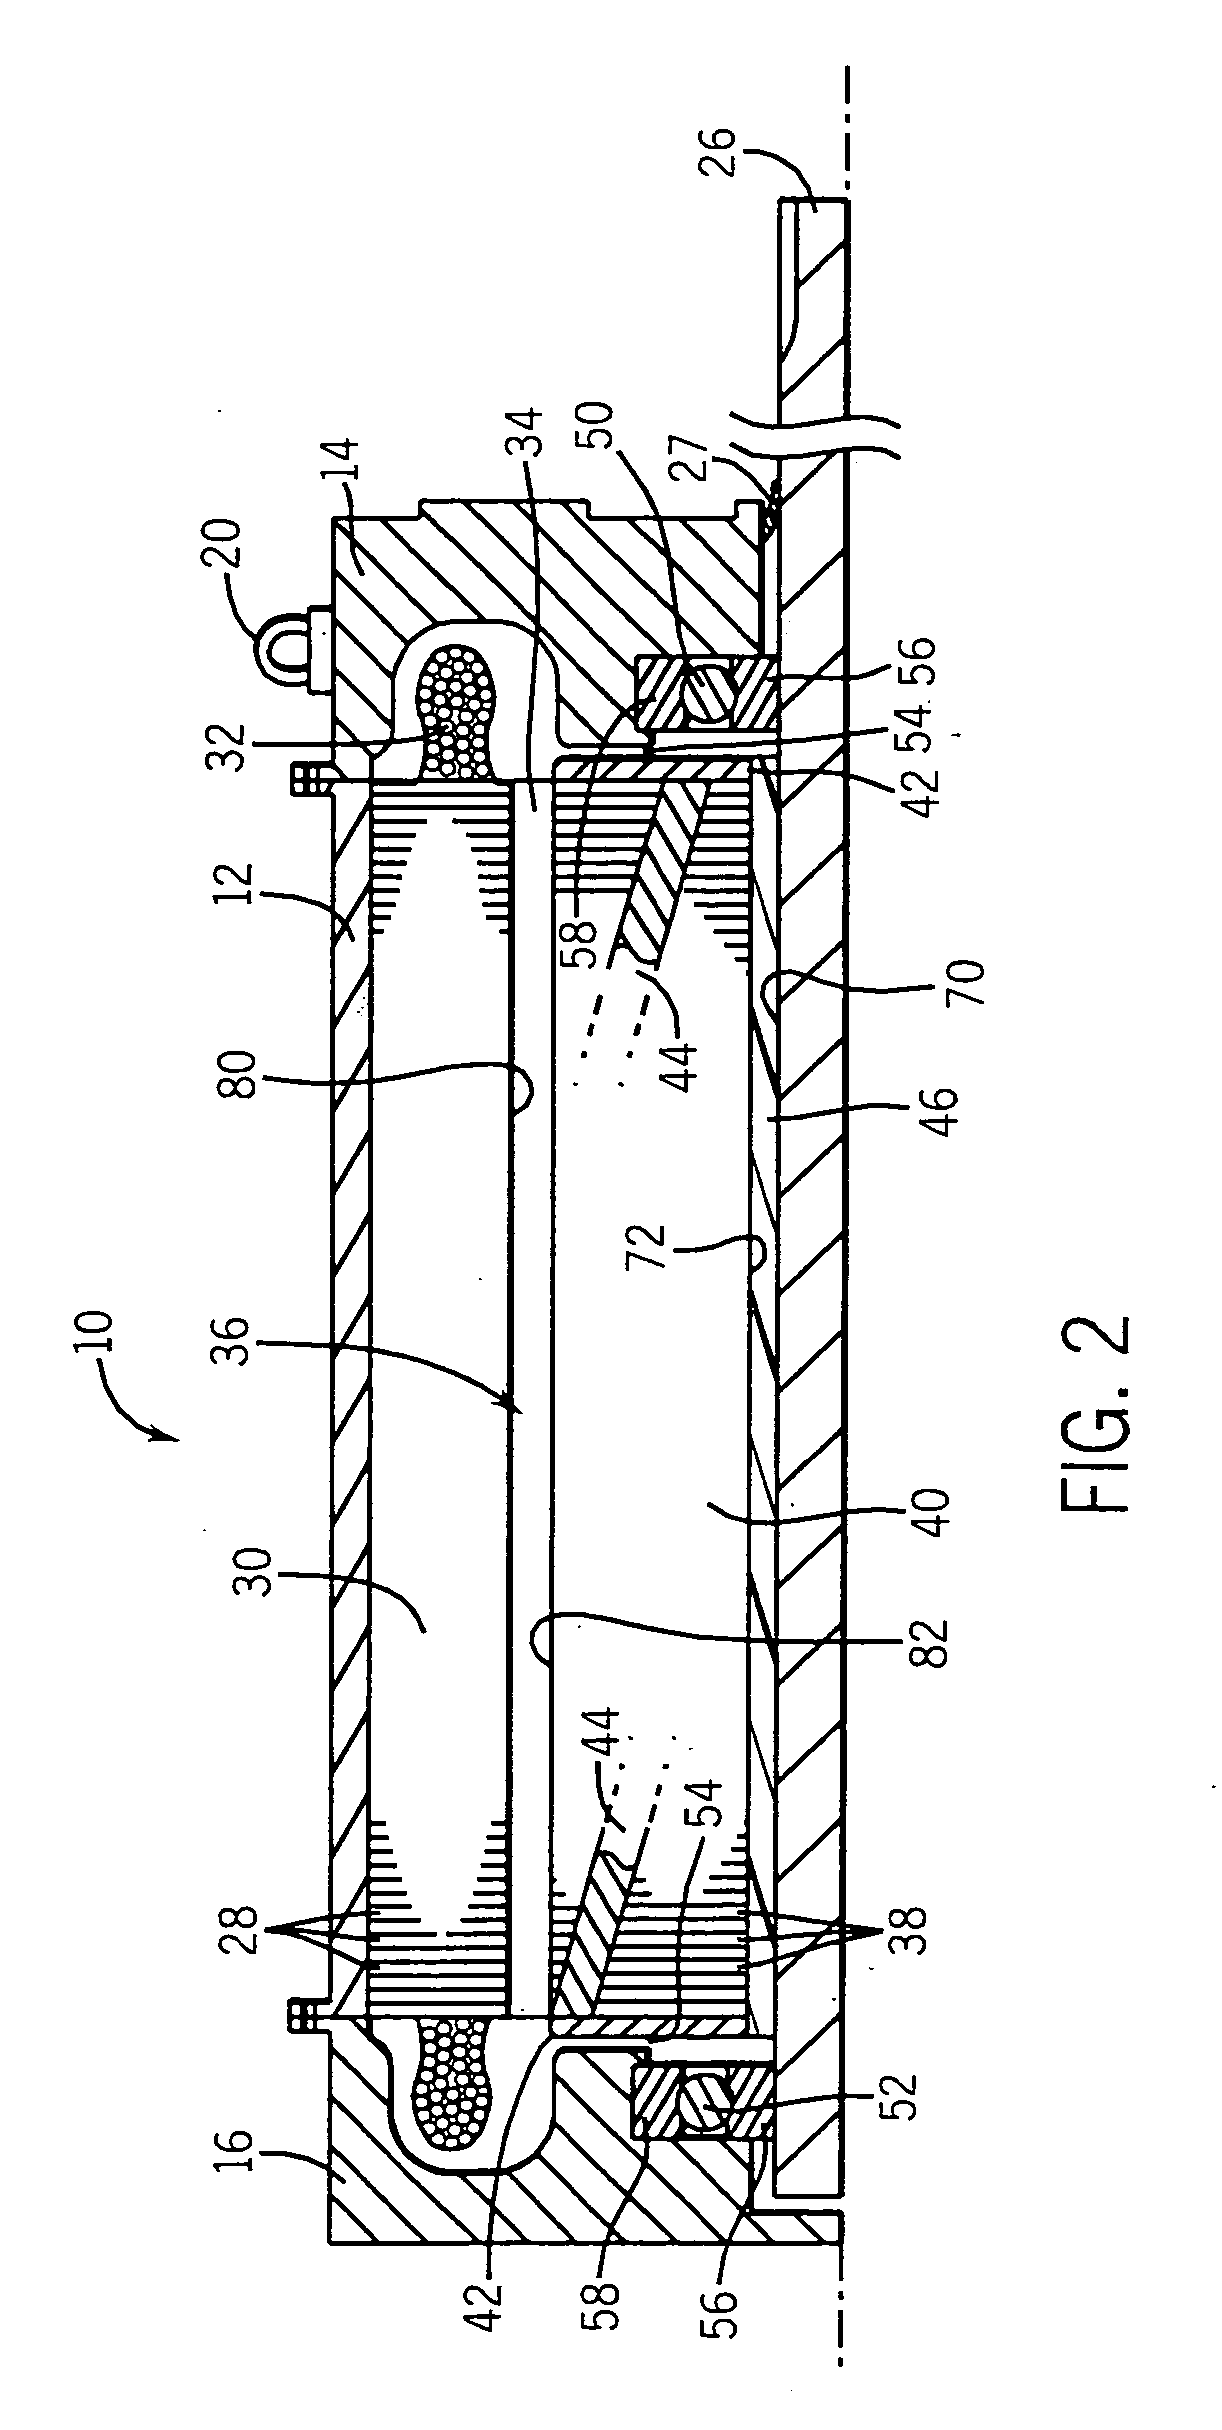 Apparatus and method for reducing shaft charge